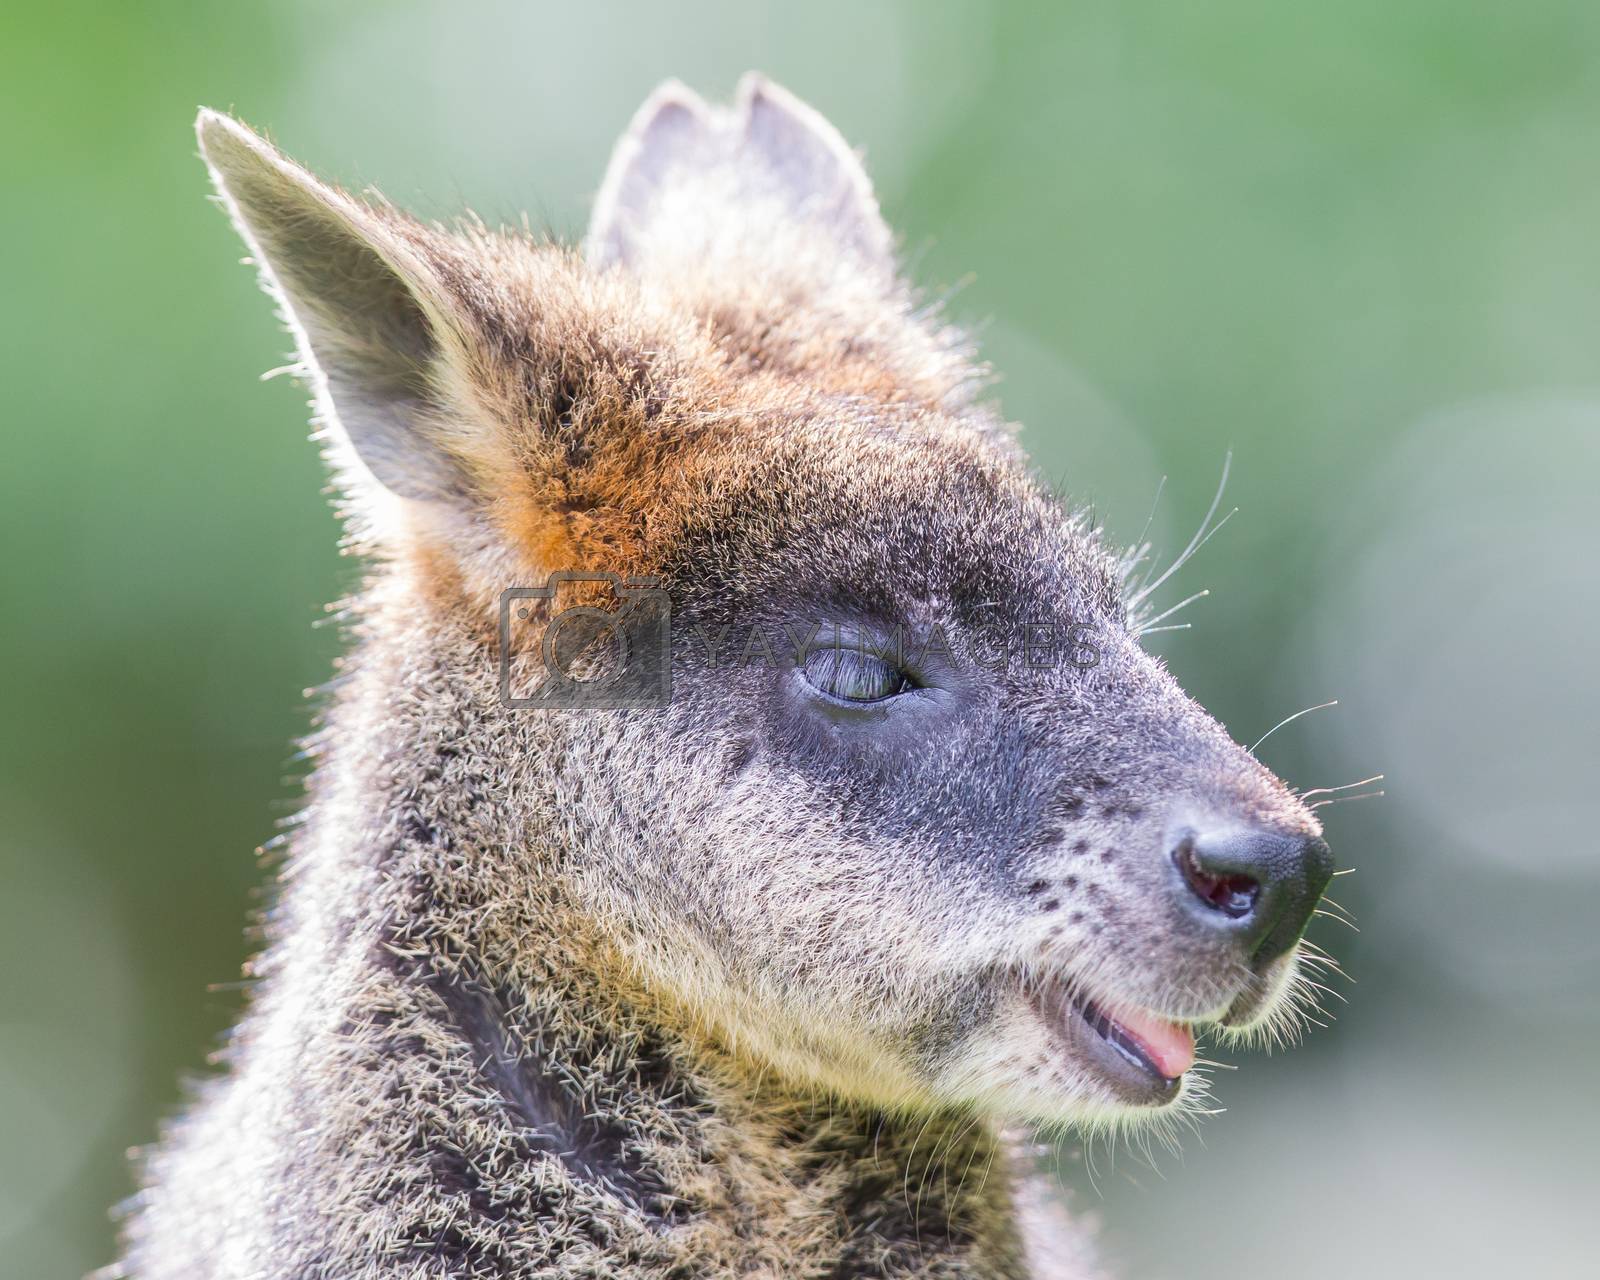 Royalty free image of Kangaroo: Wallaby close-up portrait by michaklootwijk